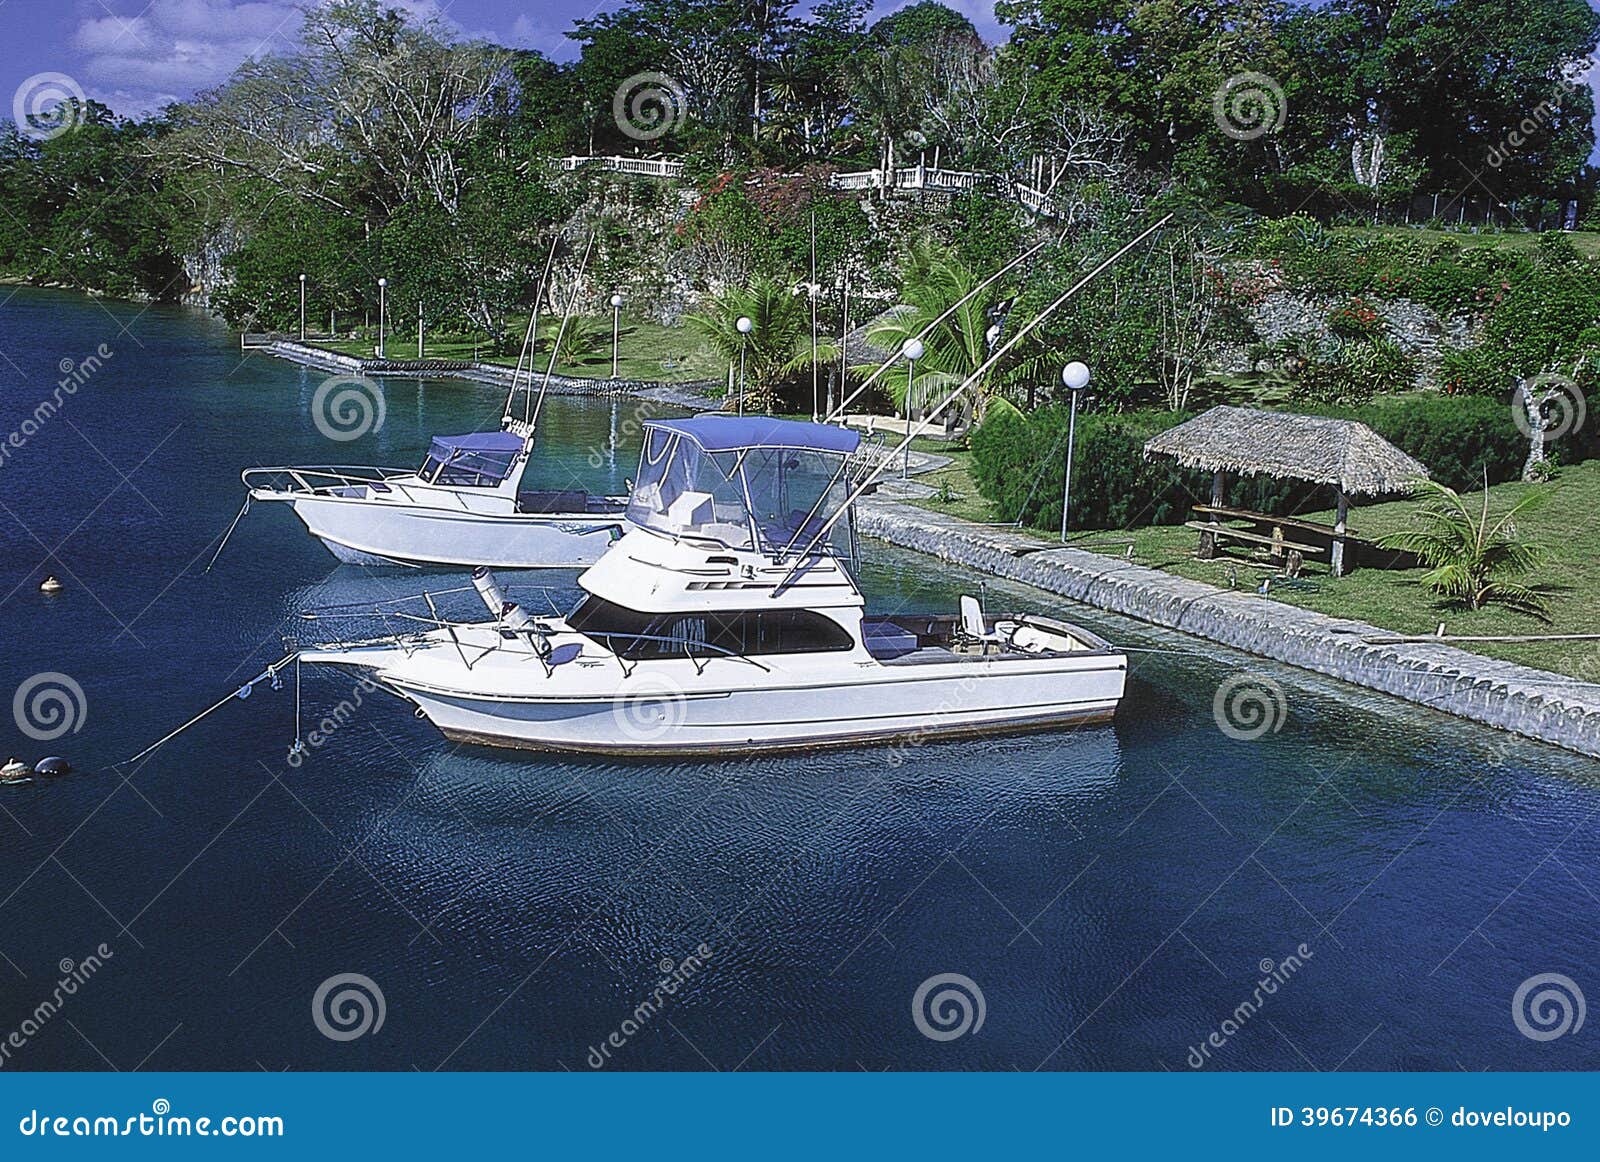 Sport fishing boats stock photo. Image of anchored, perfect - 39674366